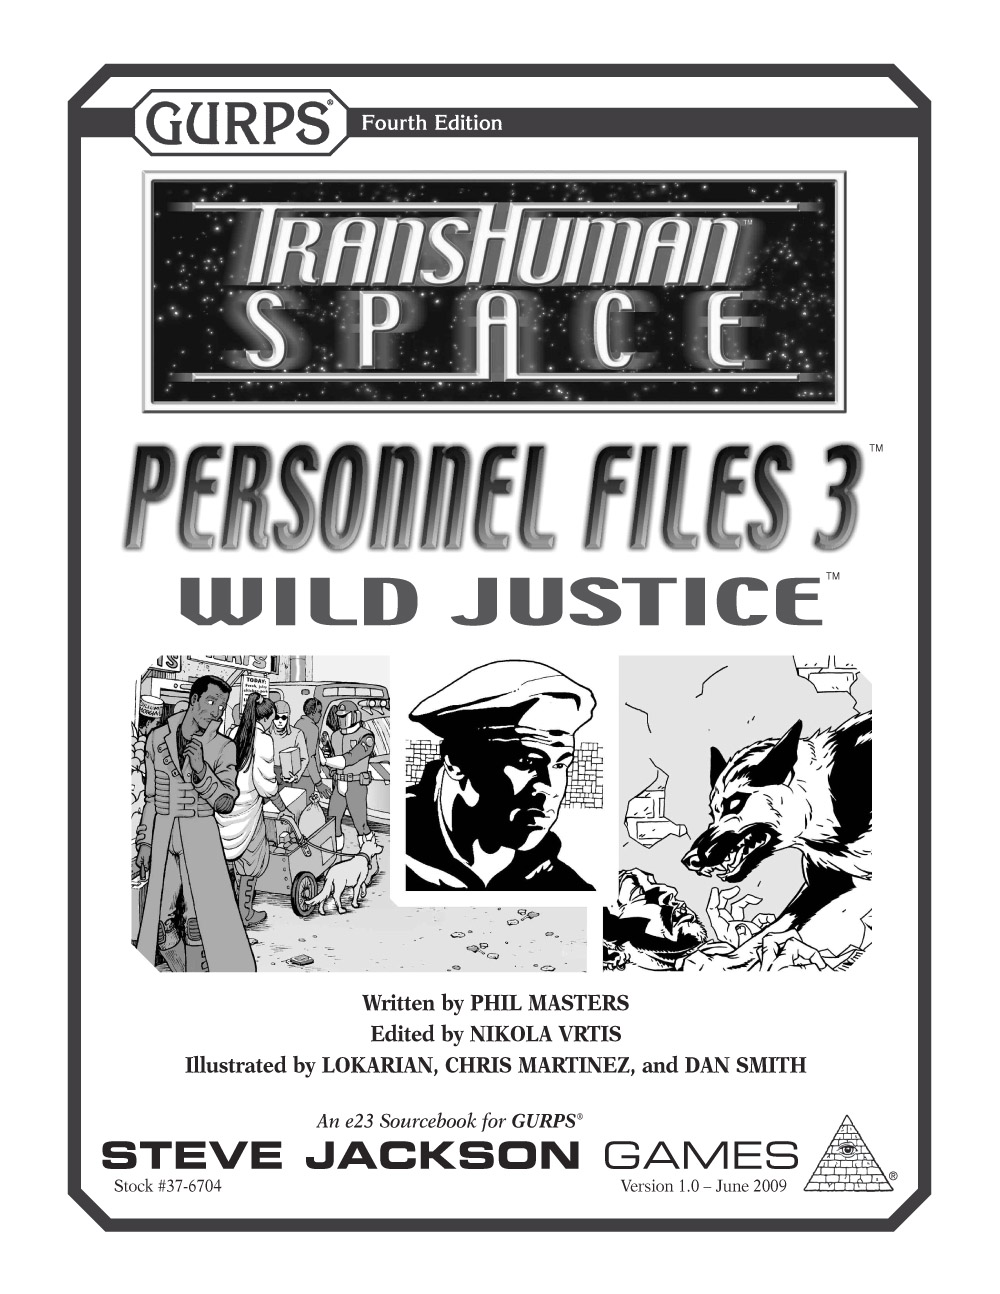 GURPS Transhuman Space: Personnel Files 3 � Wild Justice